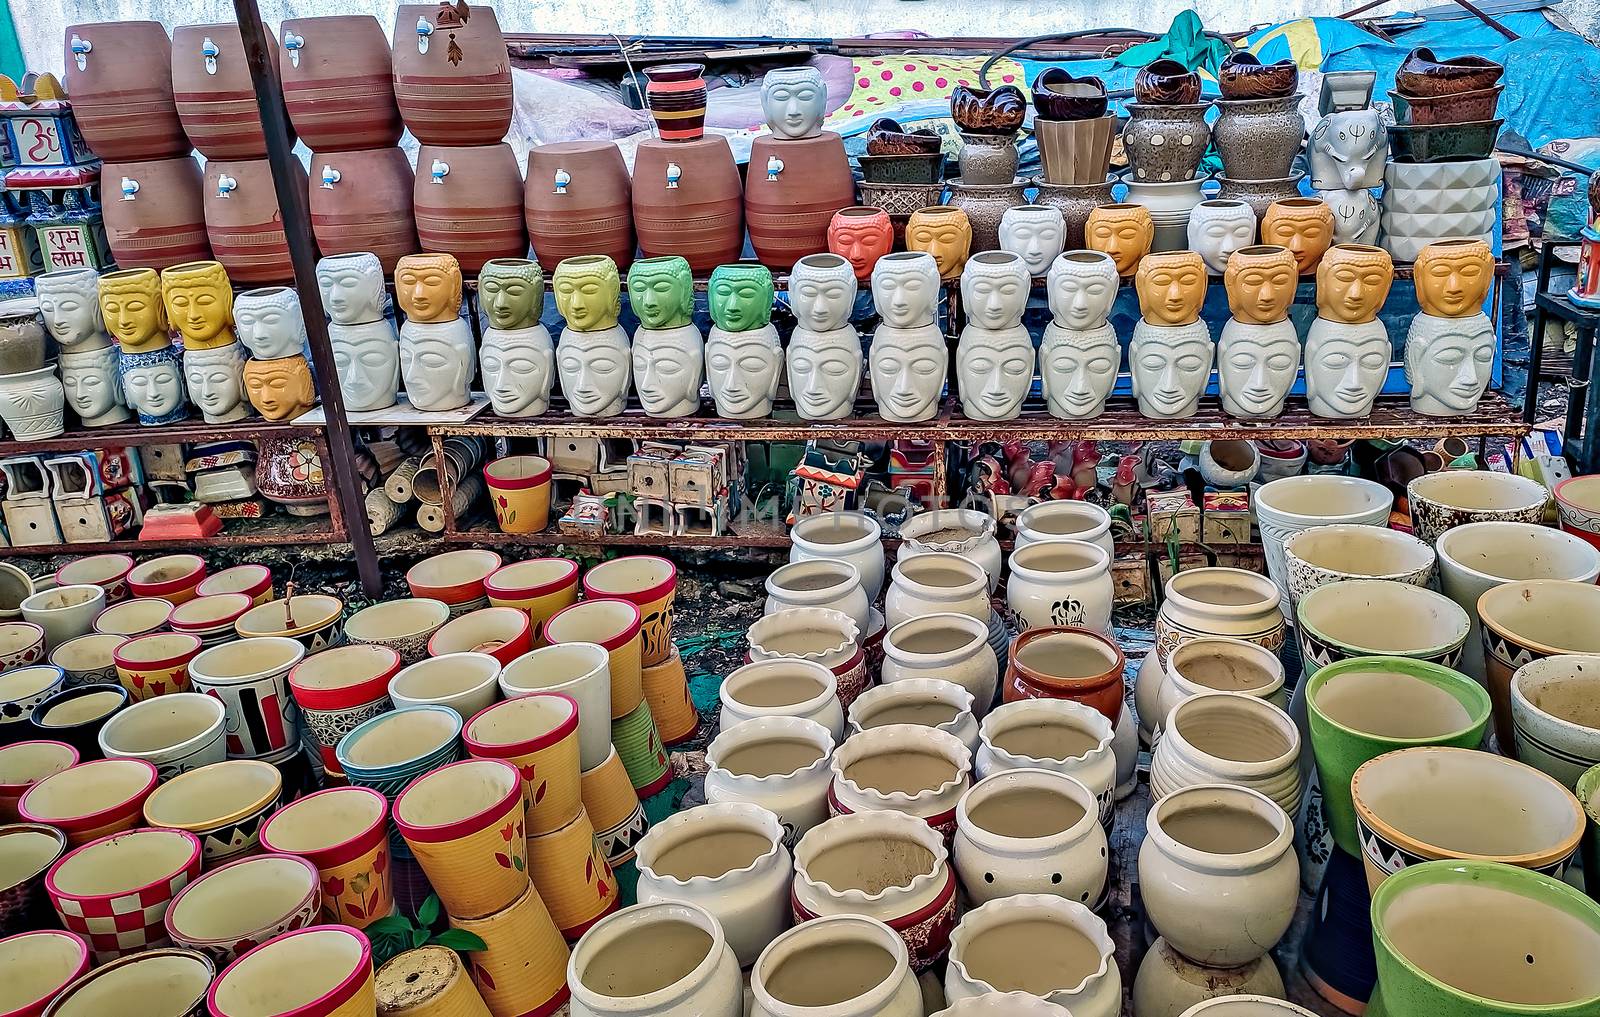 Decorative,colorful ceramic pots arranged in a roadside shop. by lalam